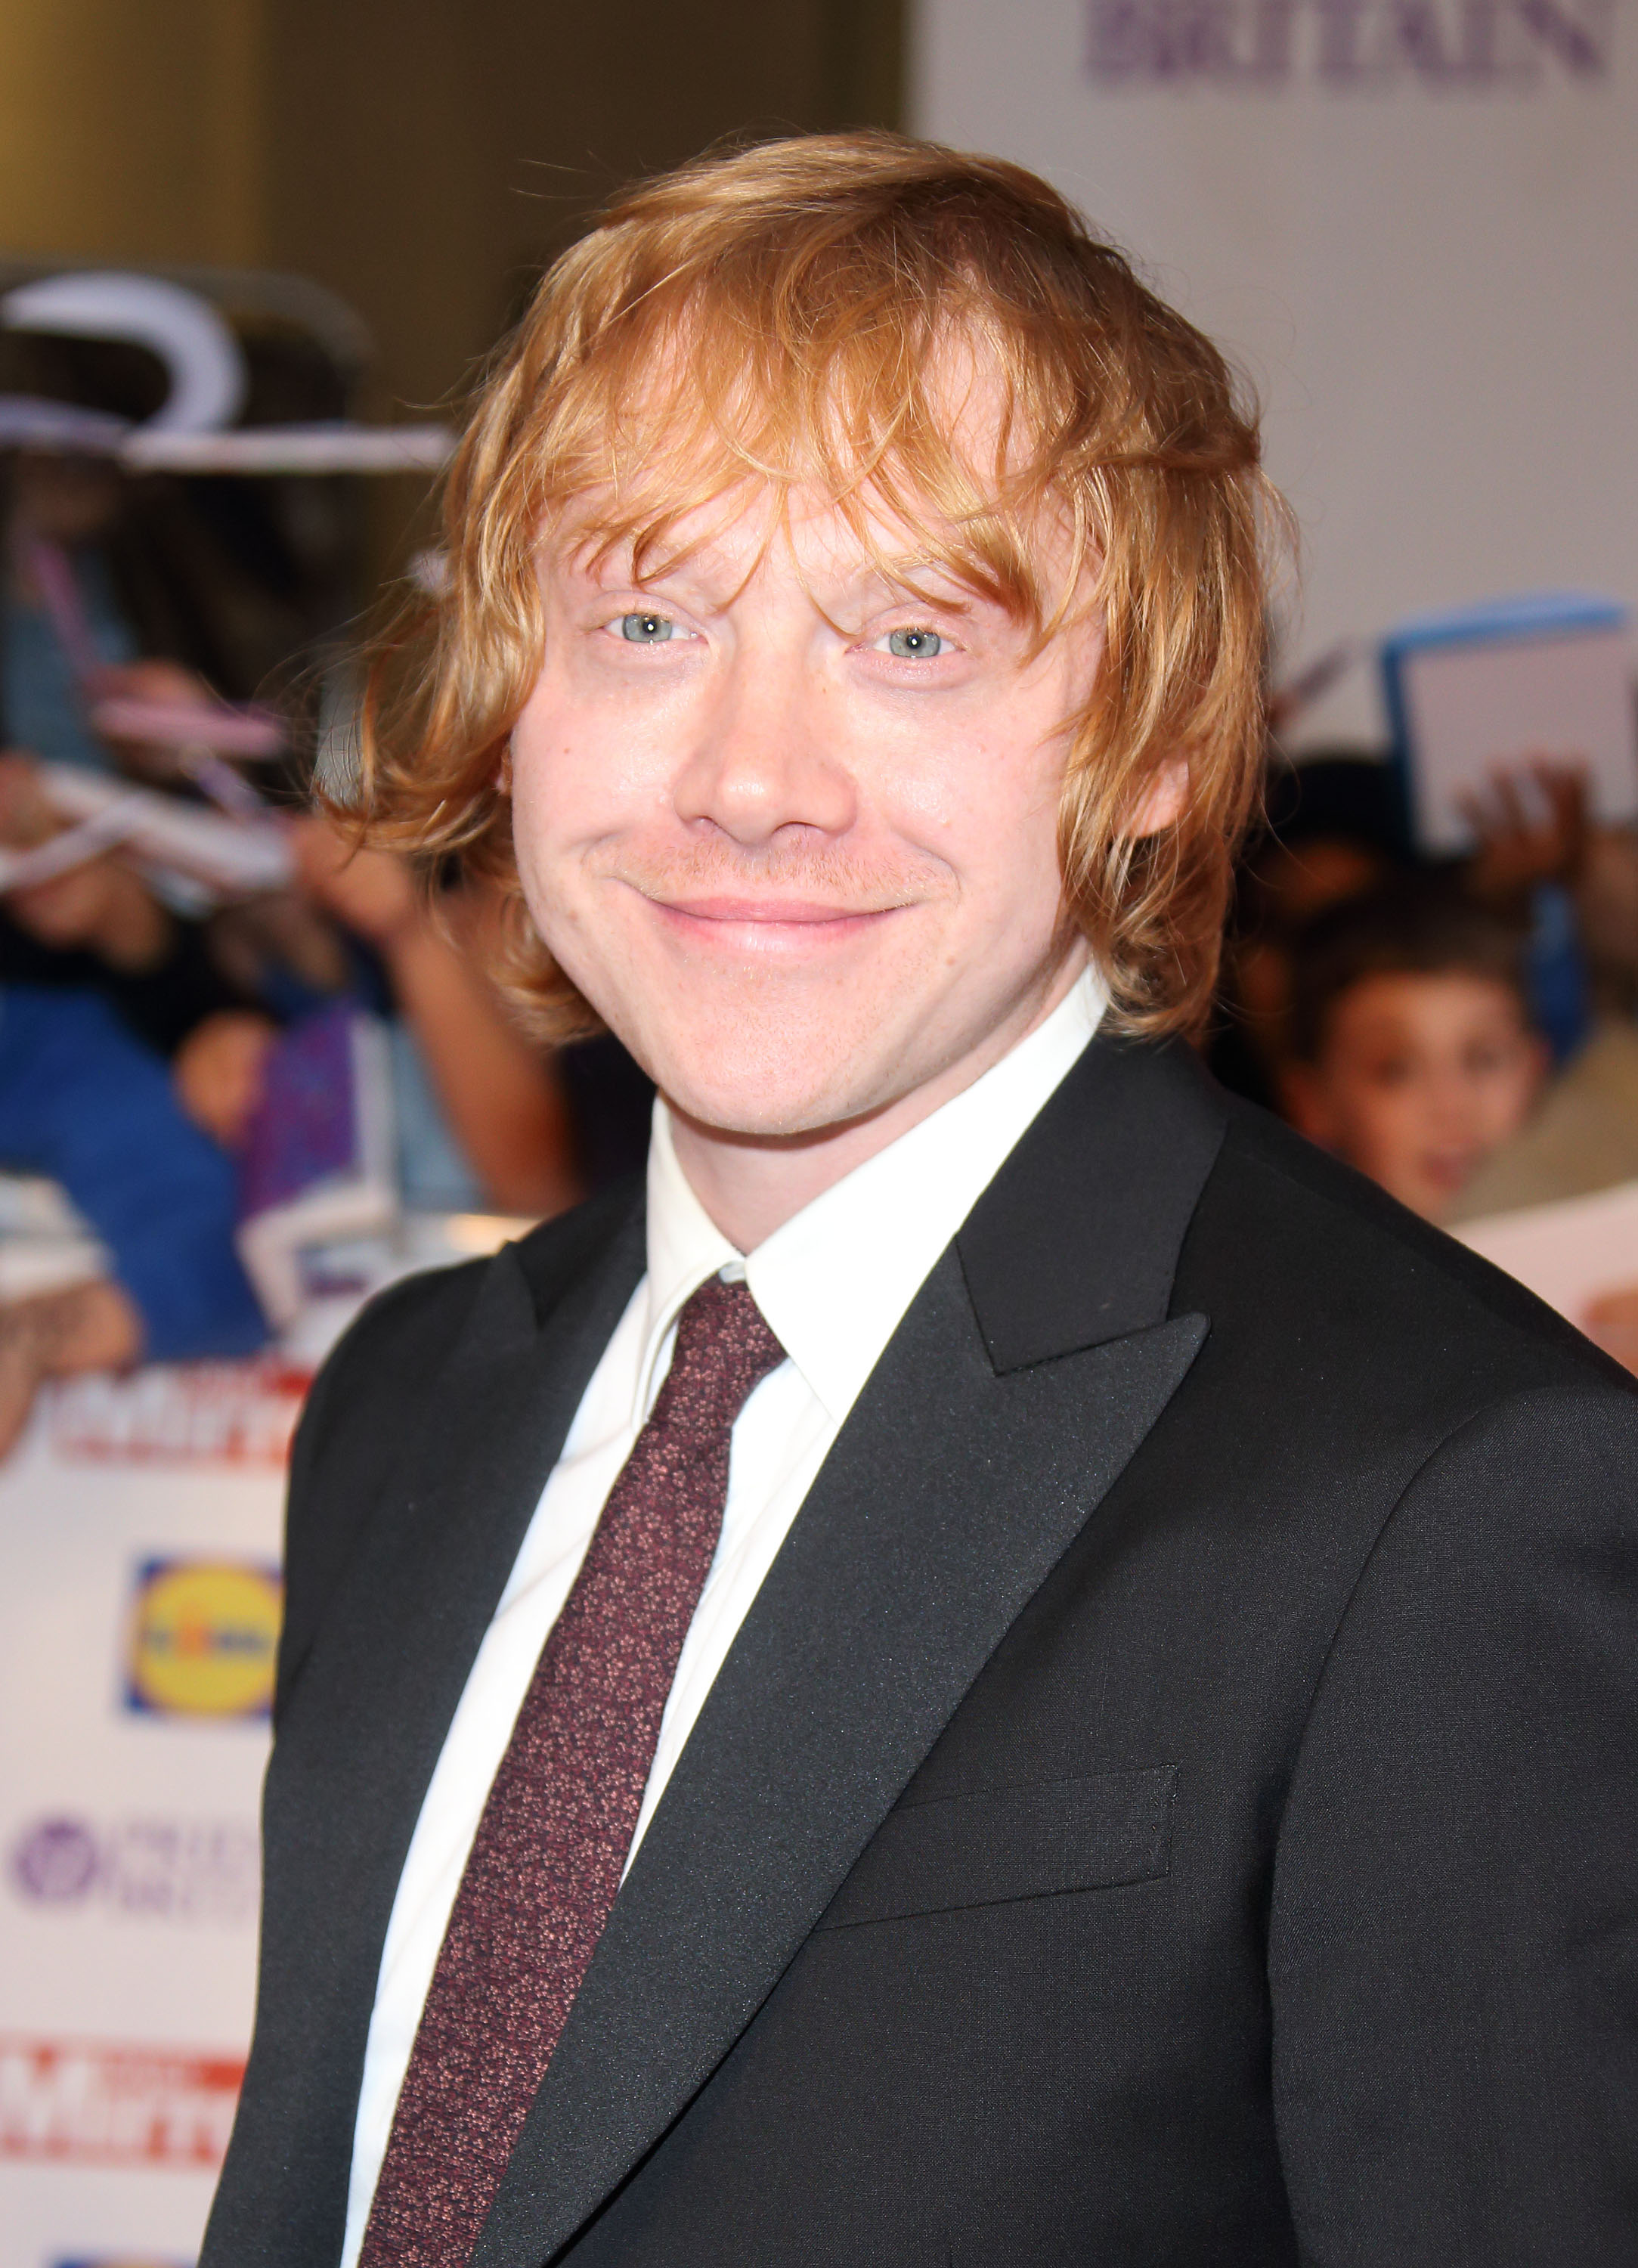 Rupert Grint at the Pride Of Britain Awards in London, England on September 28, 2015 | Source: Getty Images